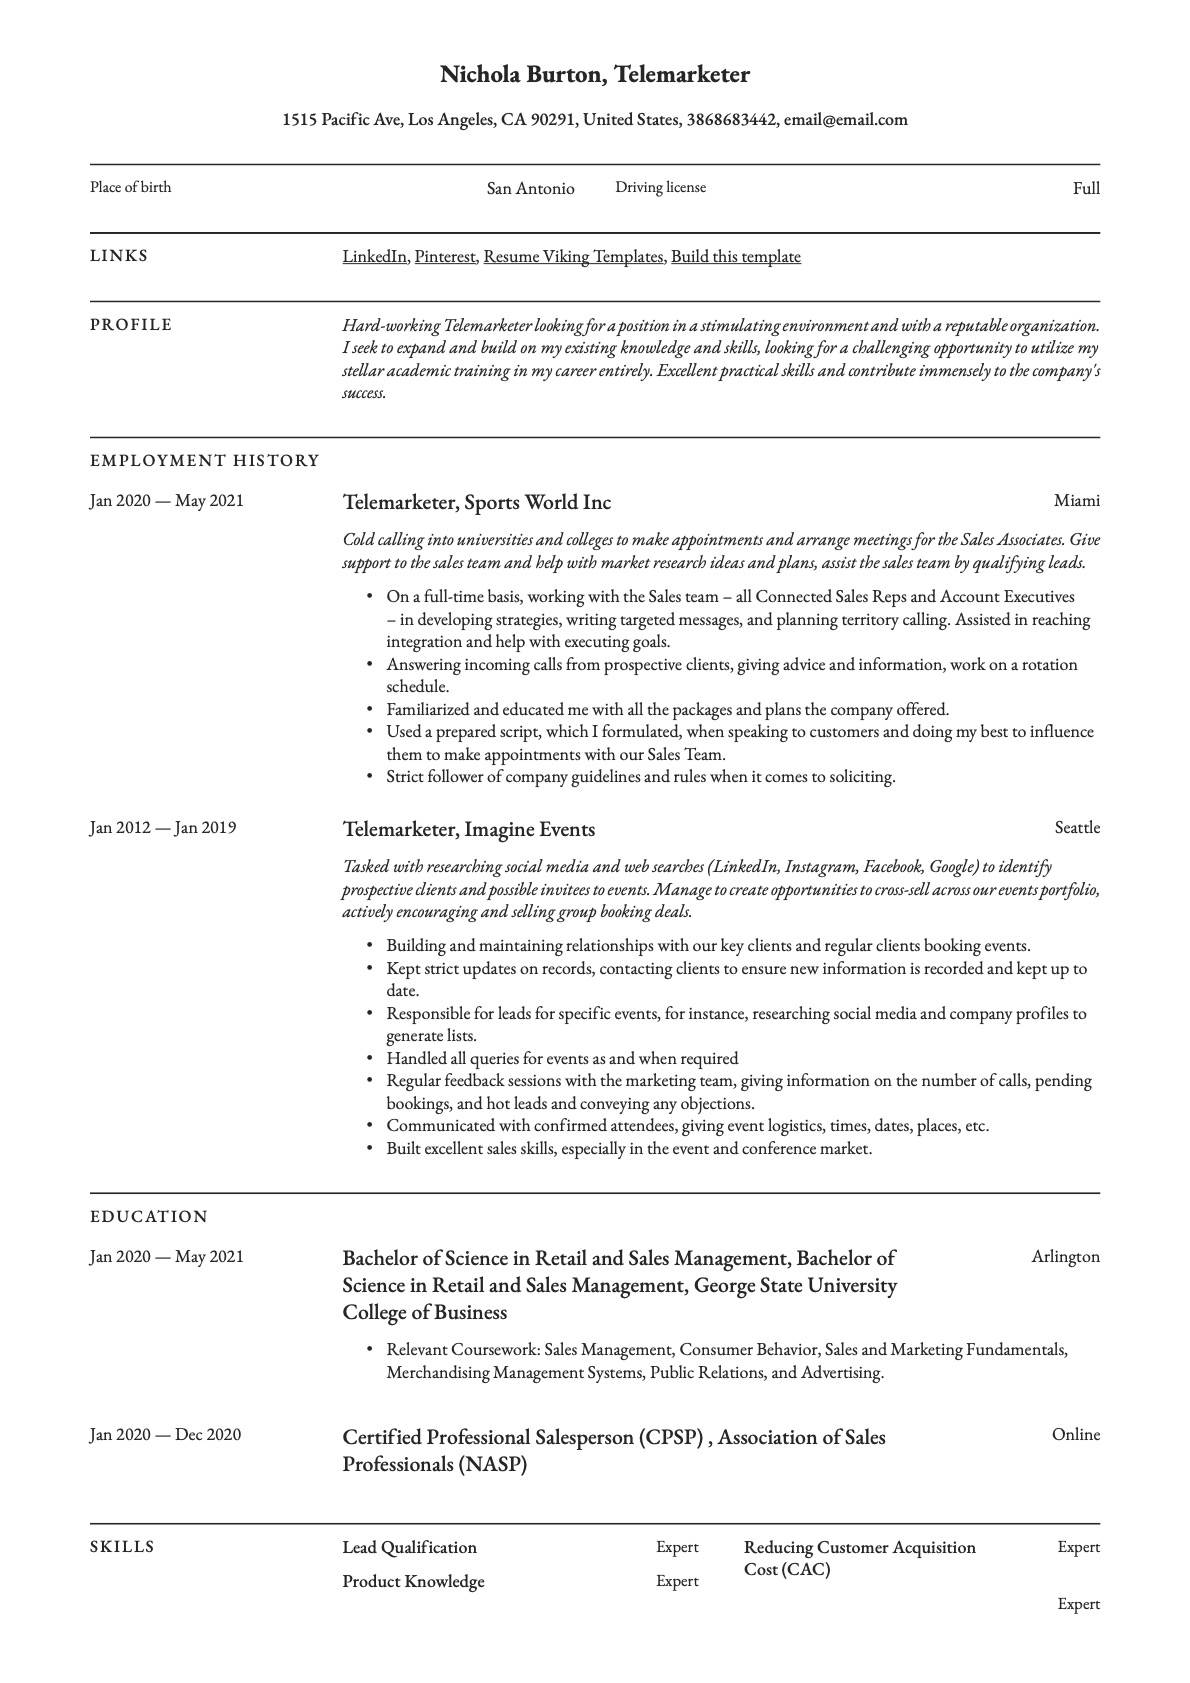 Professional Telemarketer Resume Template